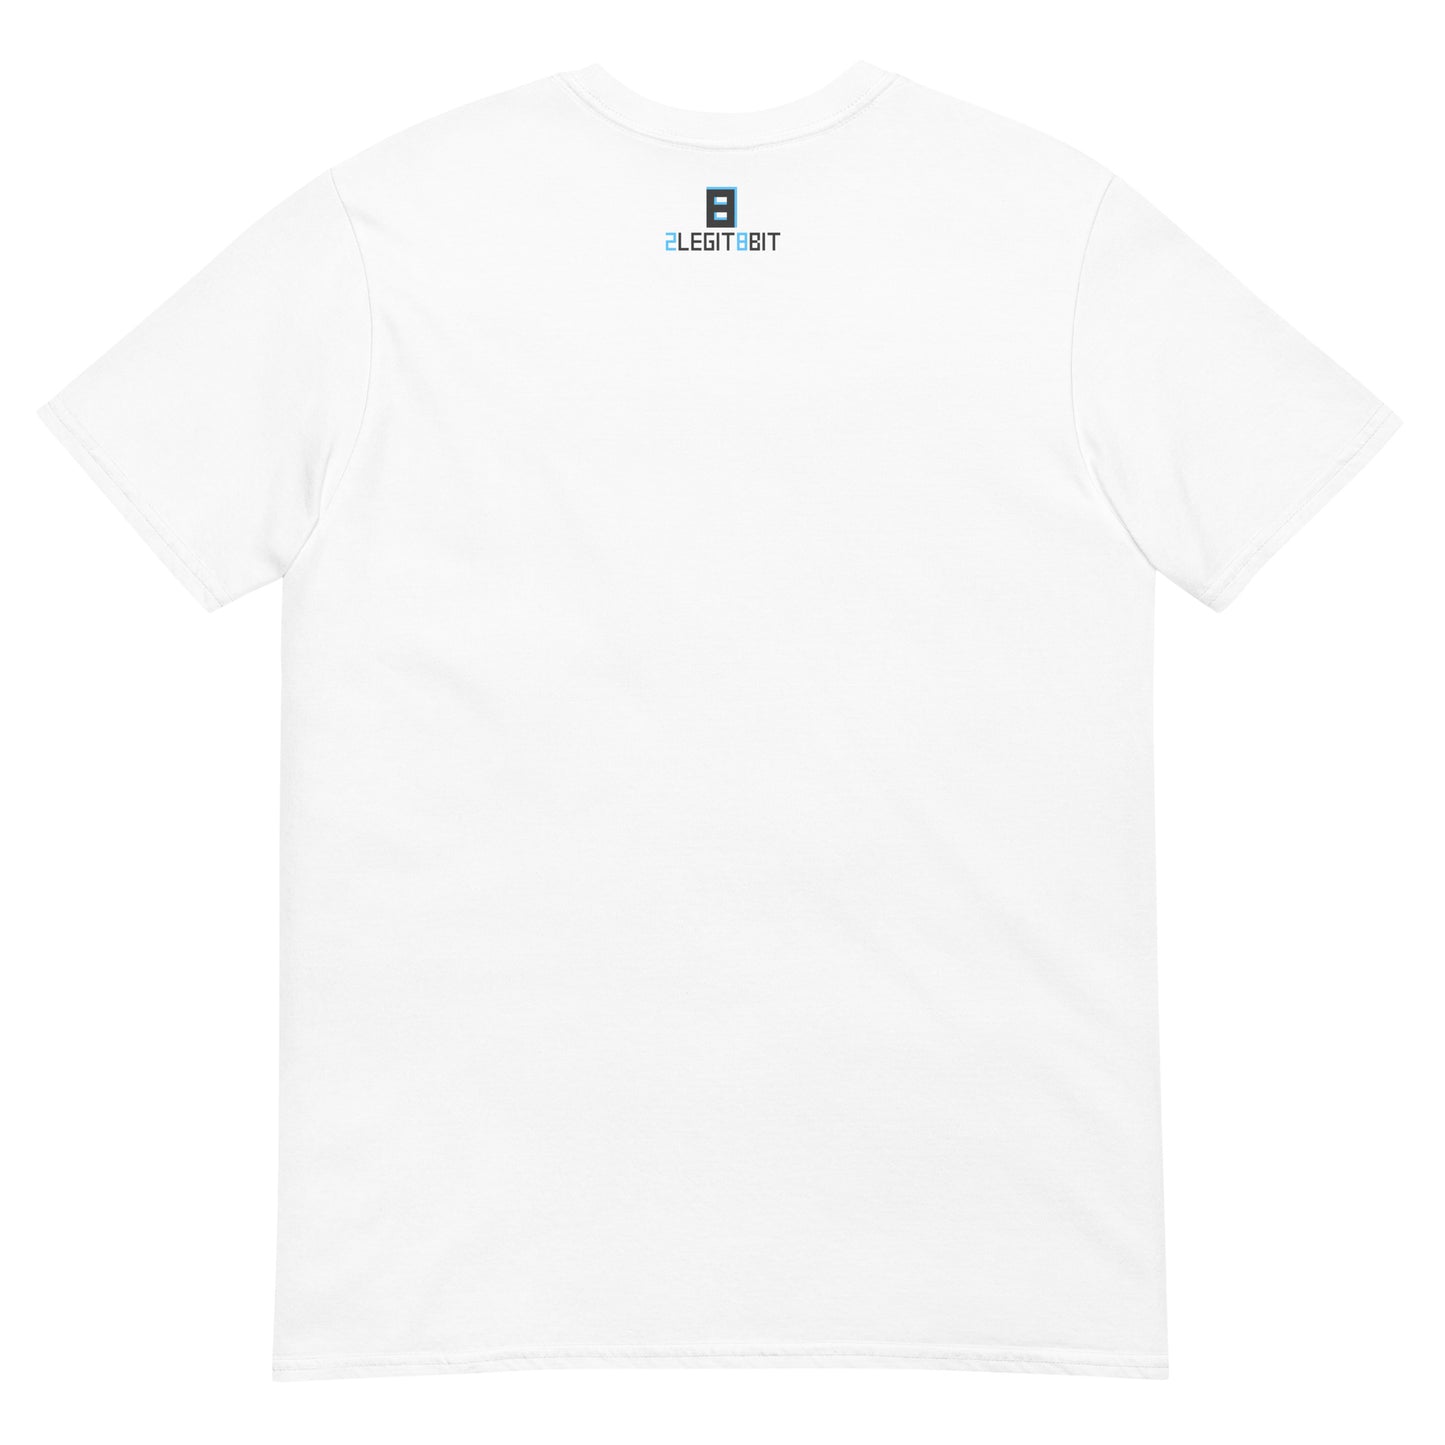 Hilliard Darby Panthers Short-Sleeve Unisex T-Shirt